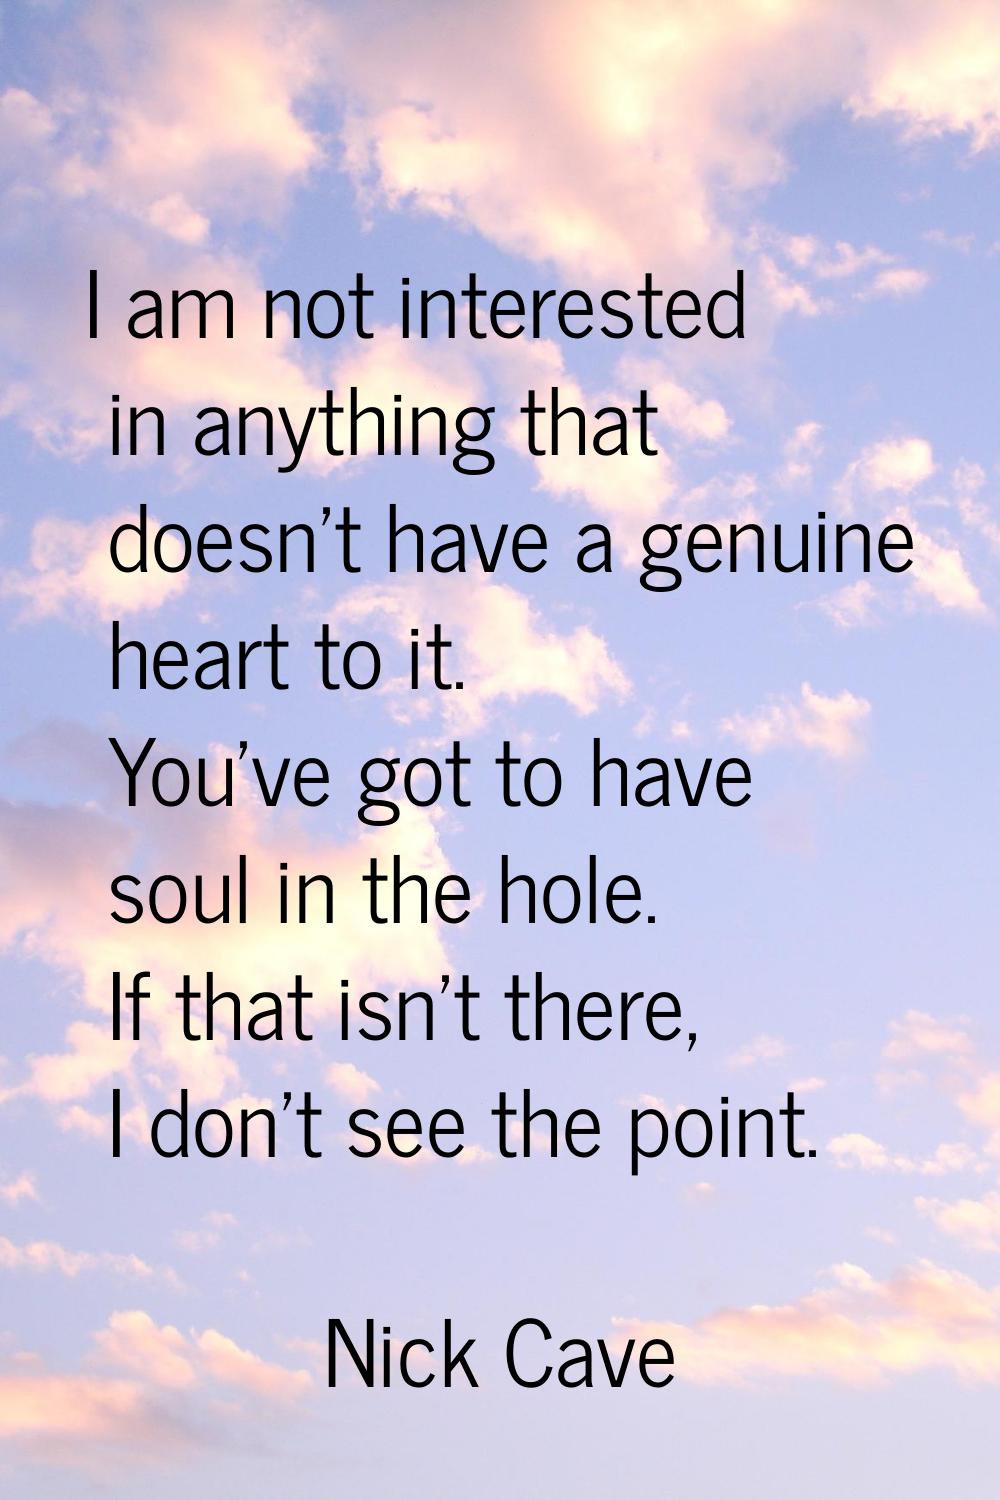 I am not interested in anything that doesn't have a genuine heart to it. You've got to have soul in